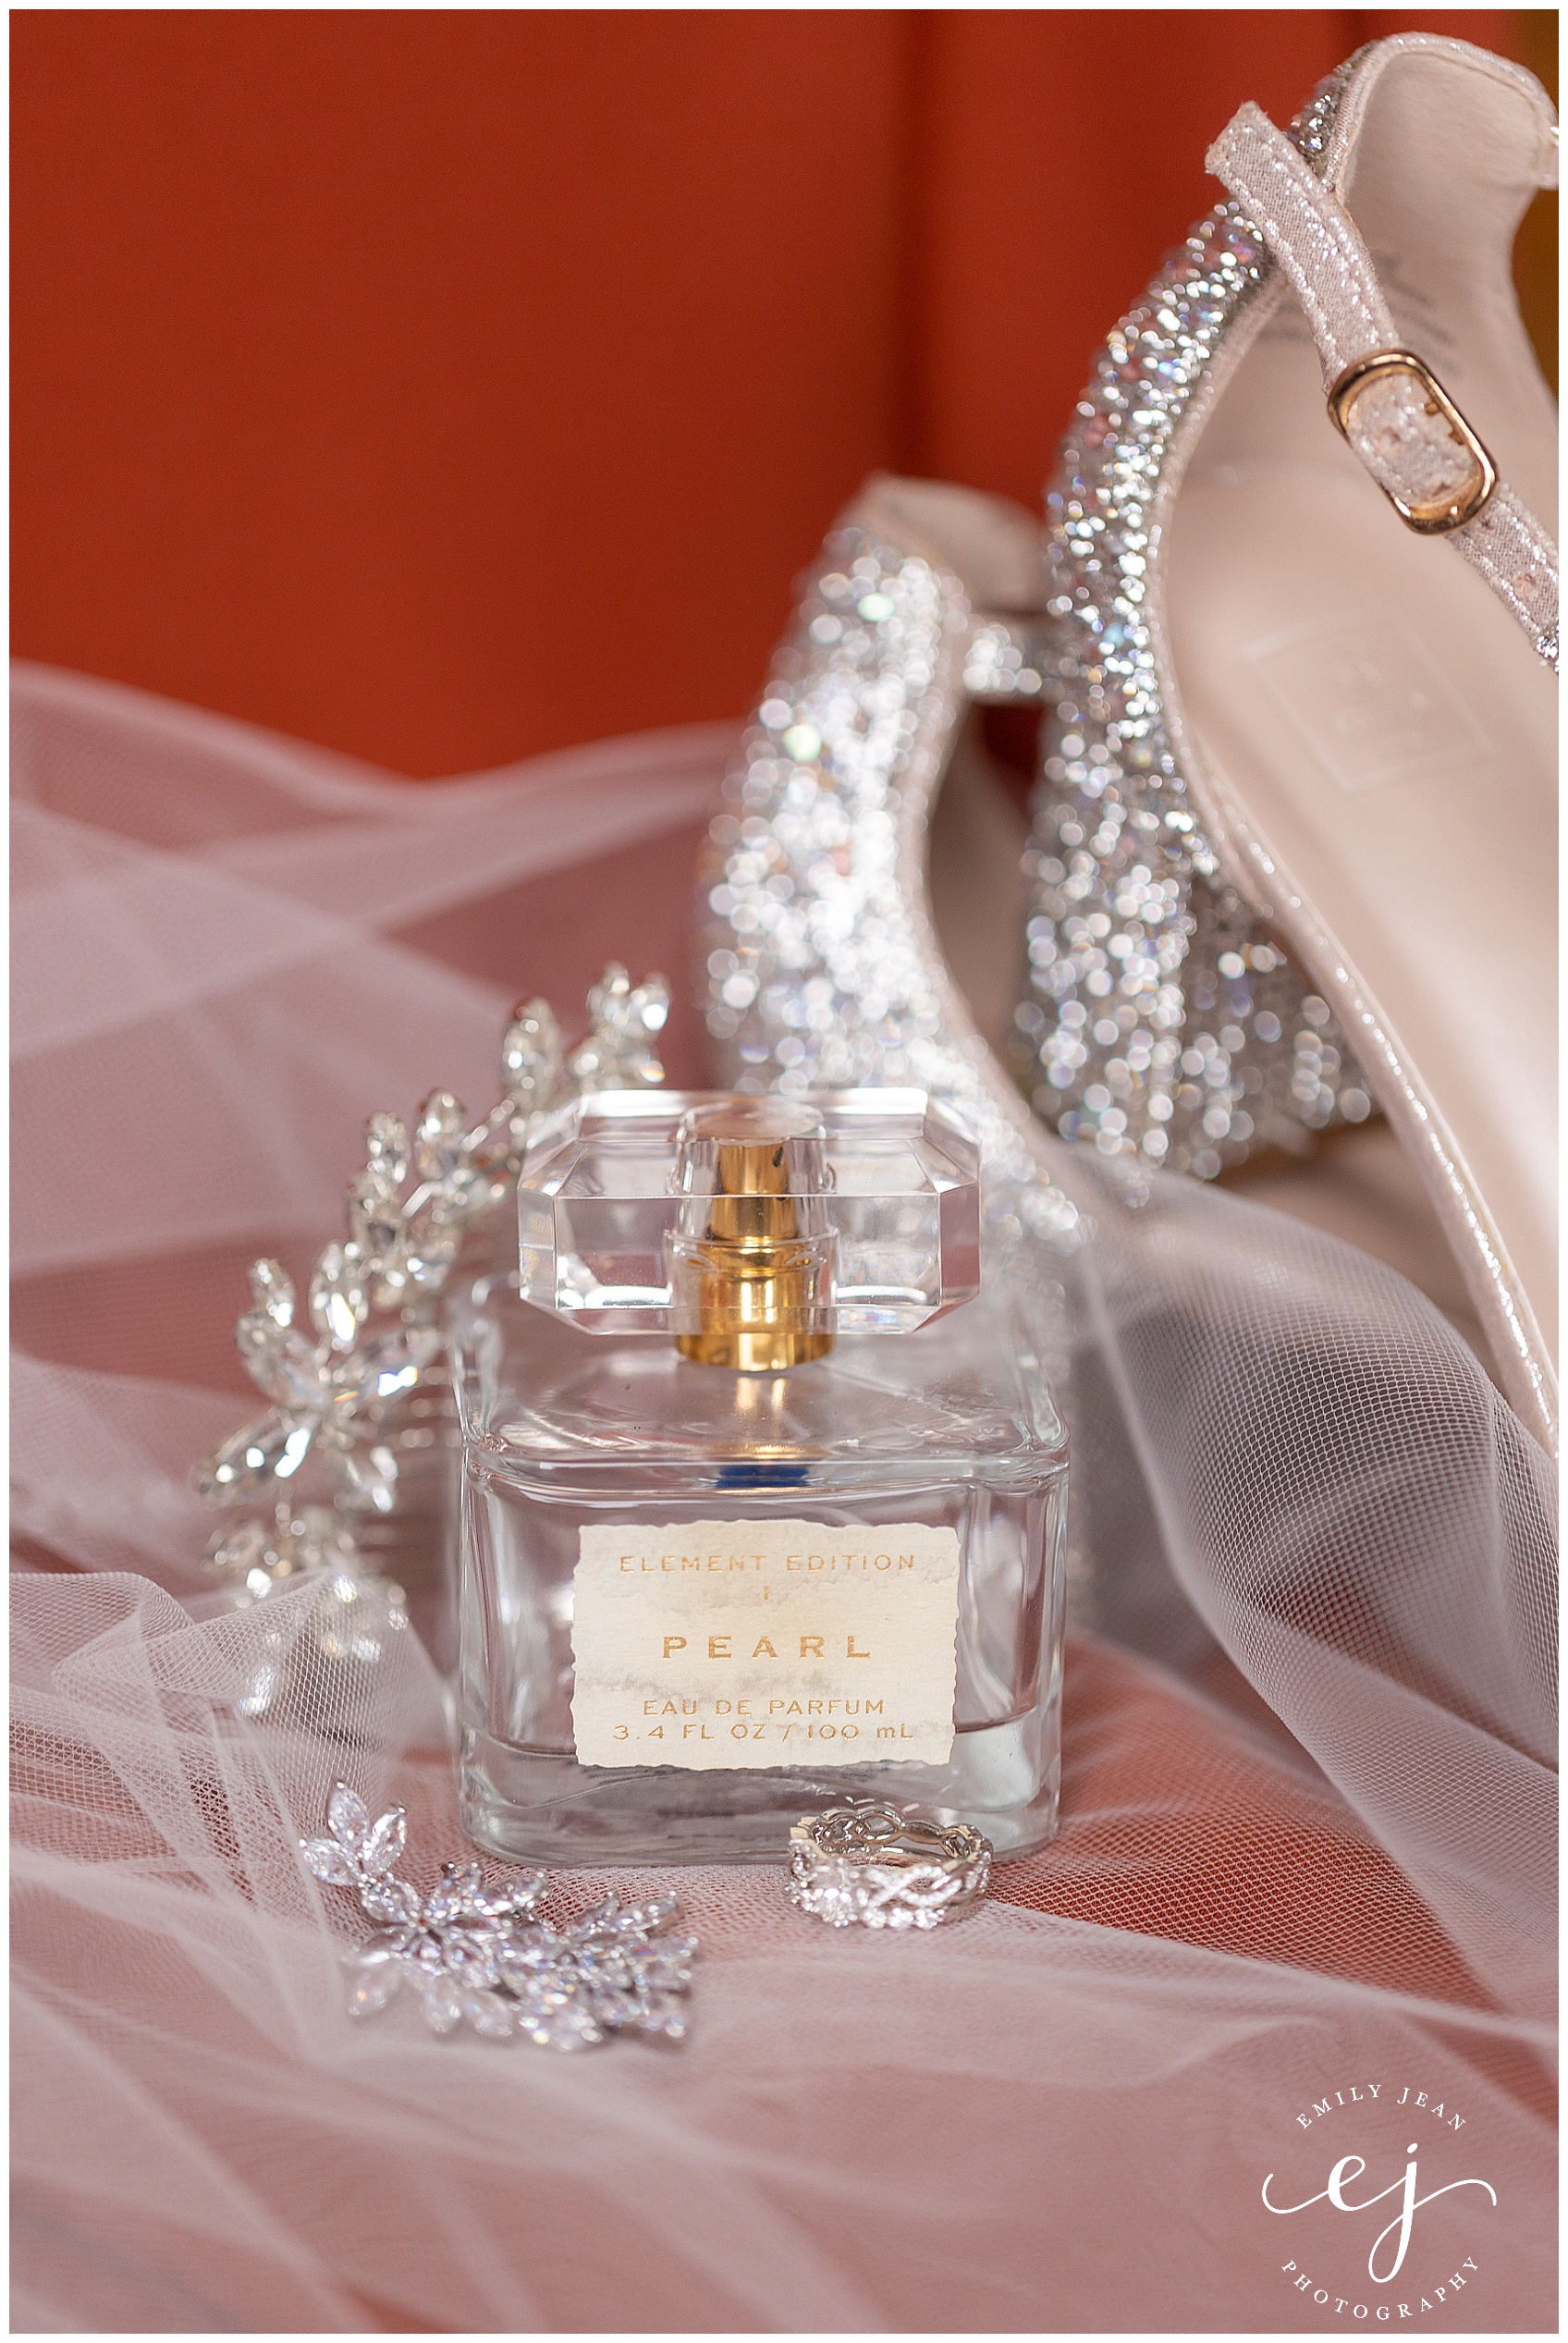 sparkle shoes hair piece and perfume